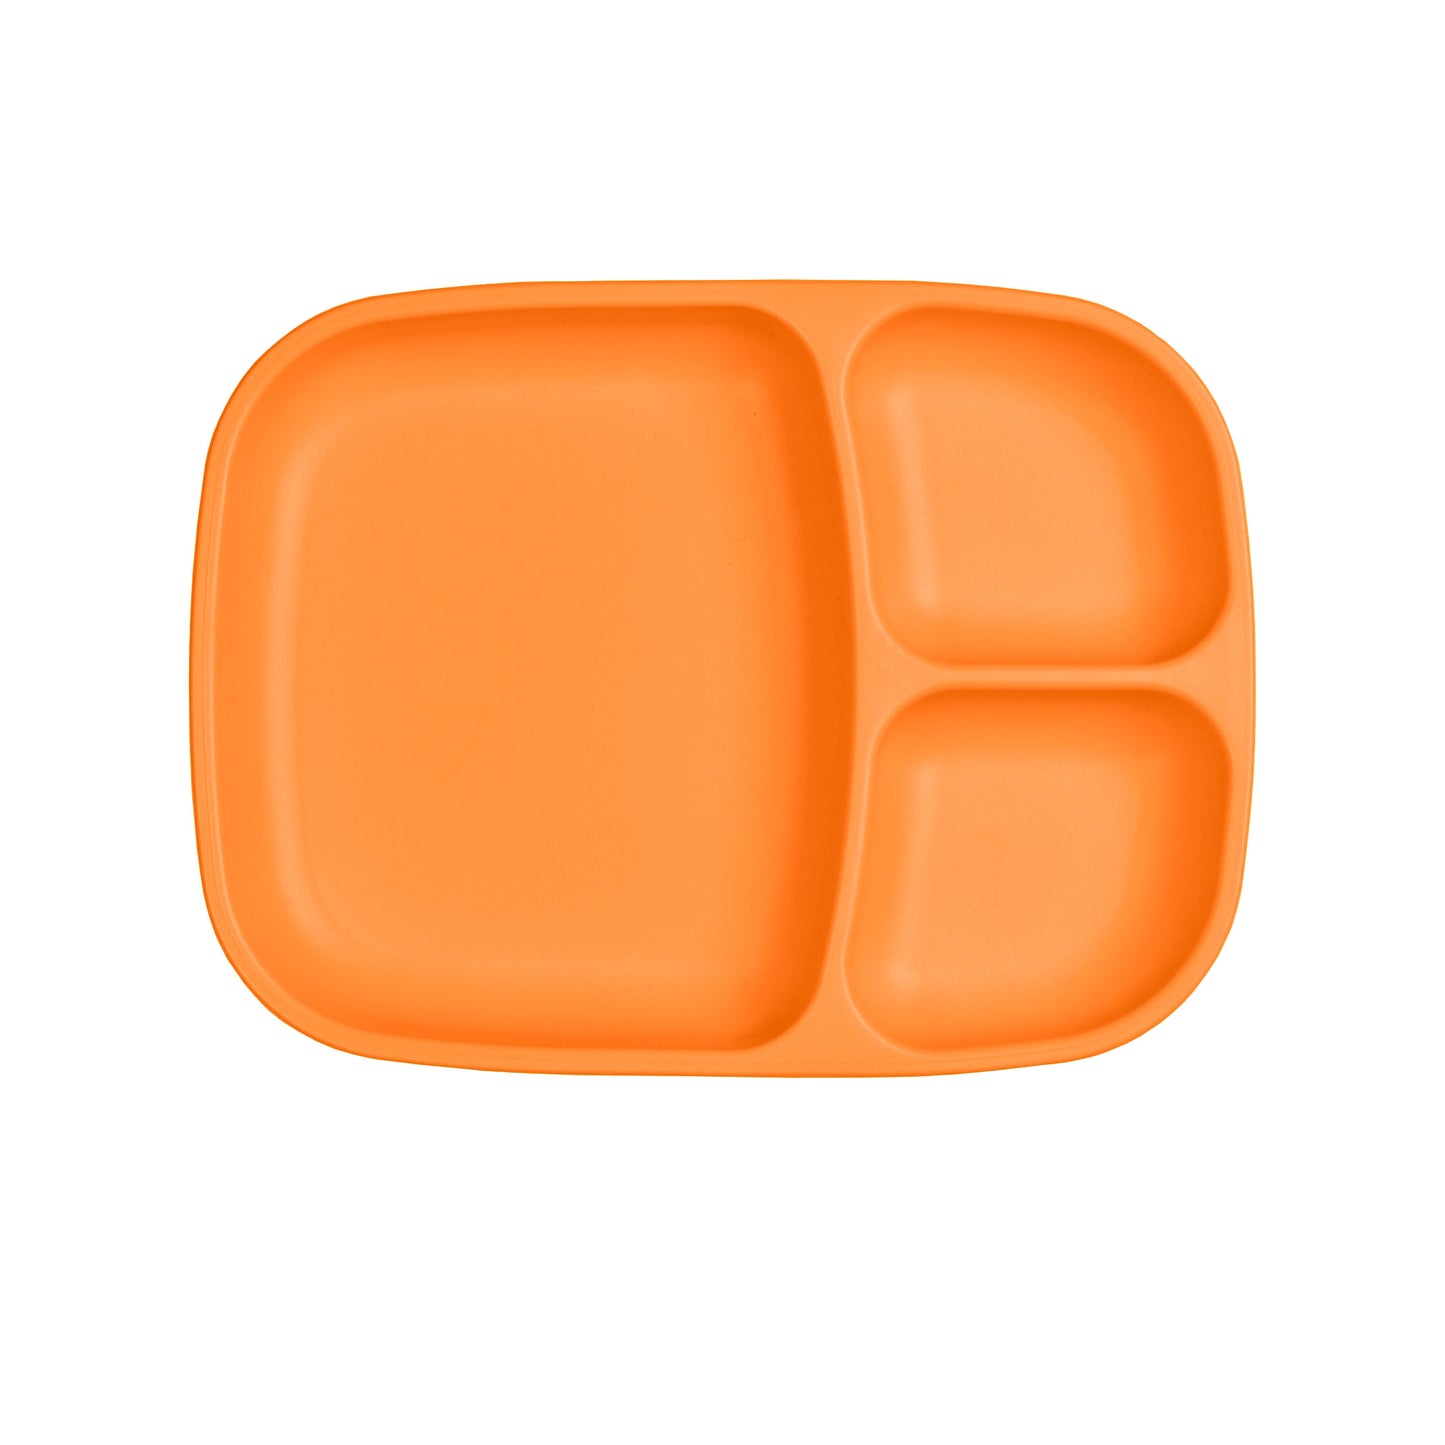 Re-Play Large Divided Plate - Orange